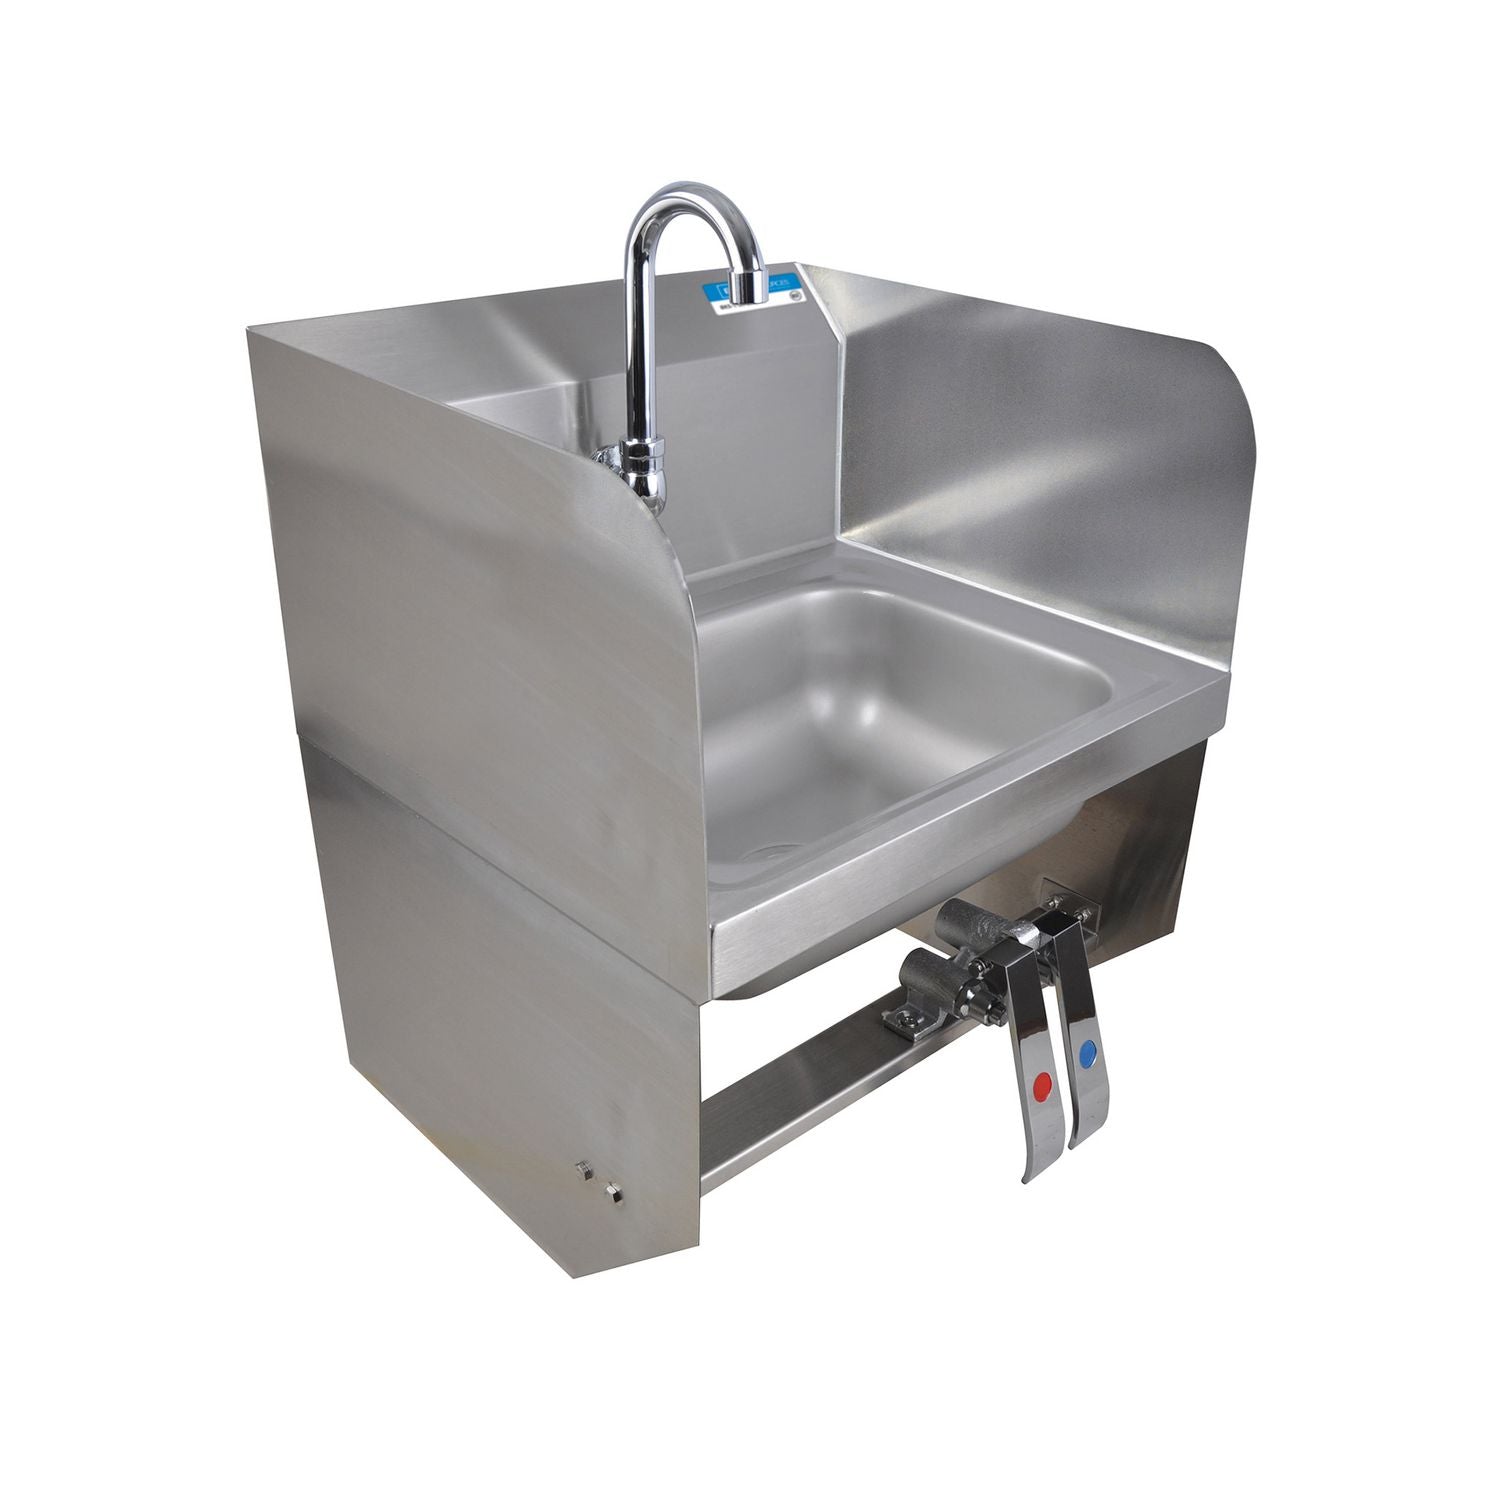 stainless-steel-hand-sink-with-side-splashes-14-l-x-10-w-x-5-d-ships-in-4-6-business-days_bkehsw14101sbkp - 1